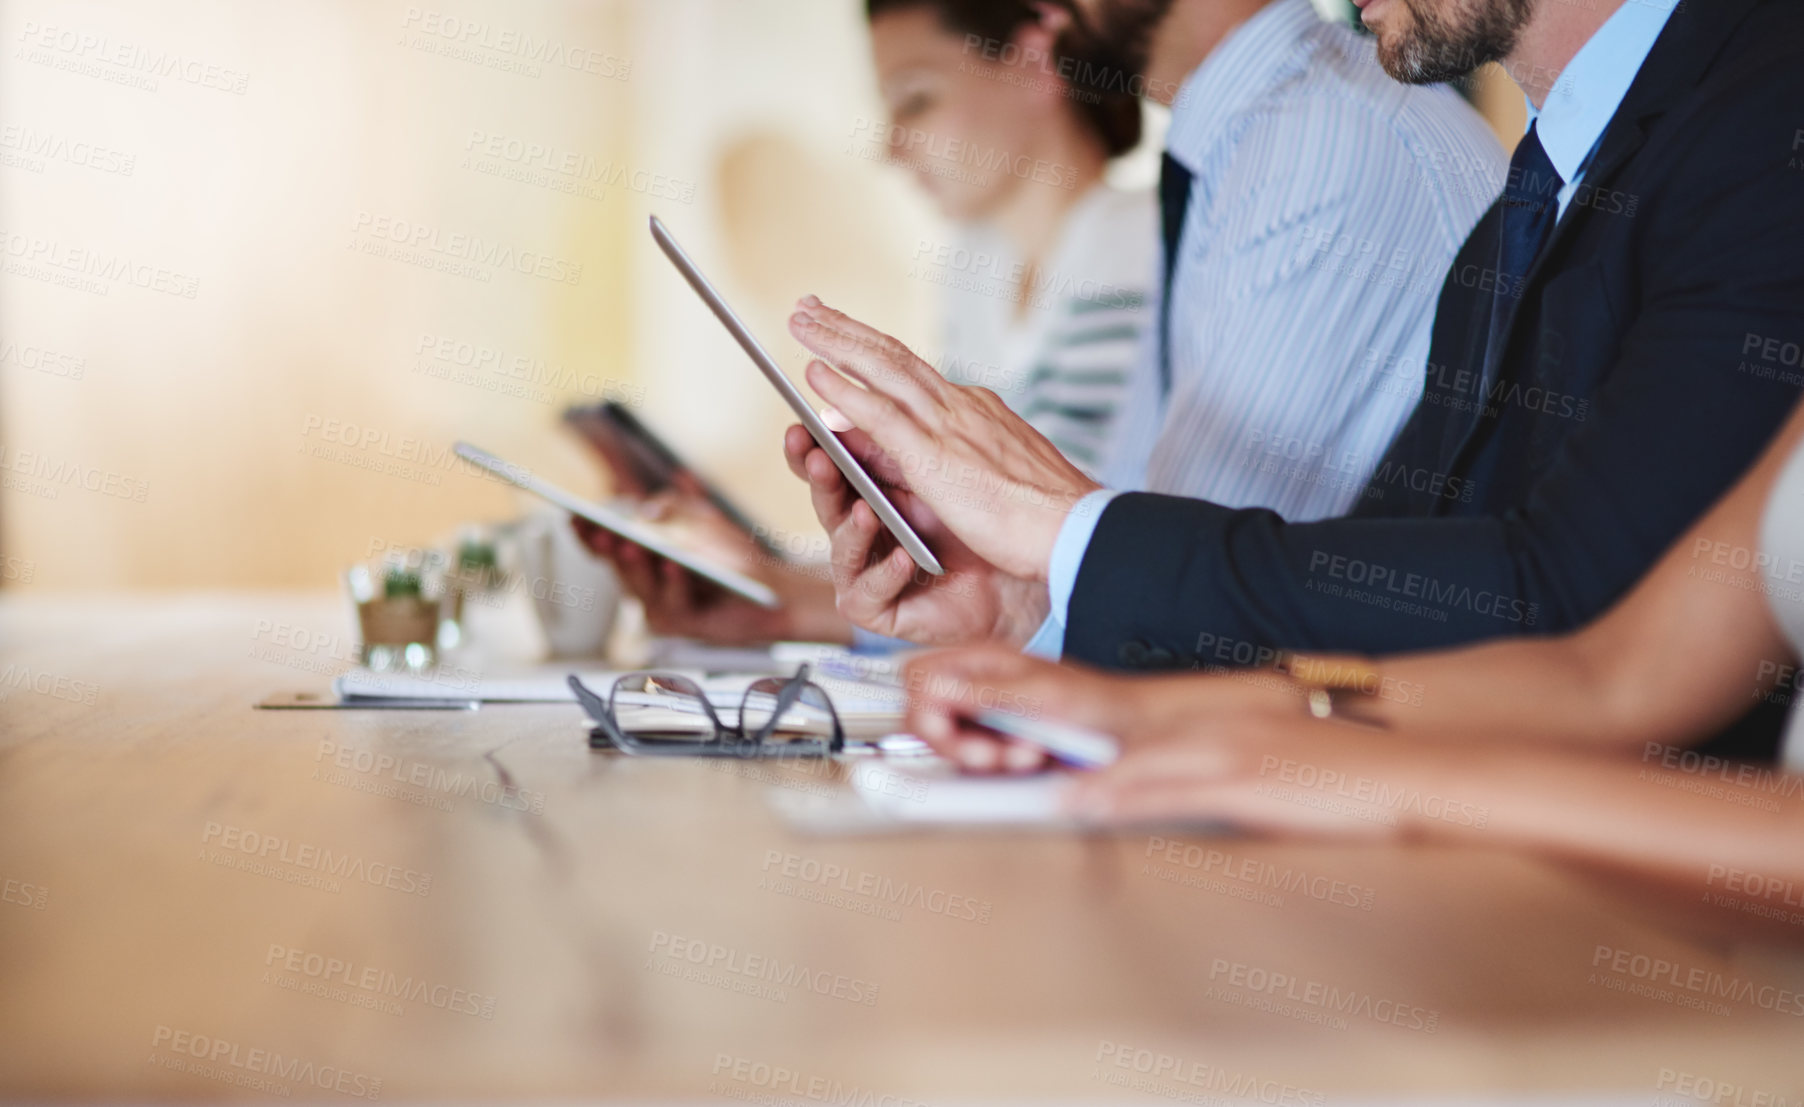 Buy stock photo Shot of businesspeople using their digital tablets during a conference